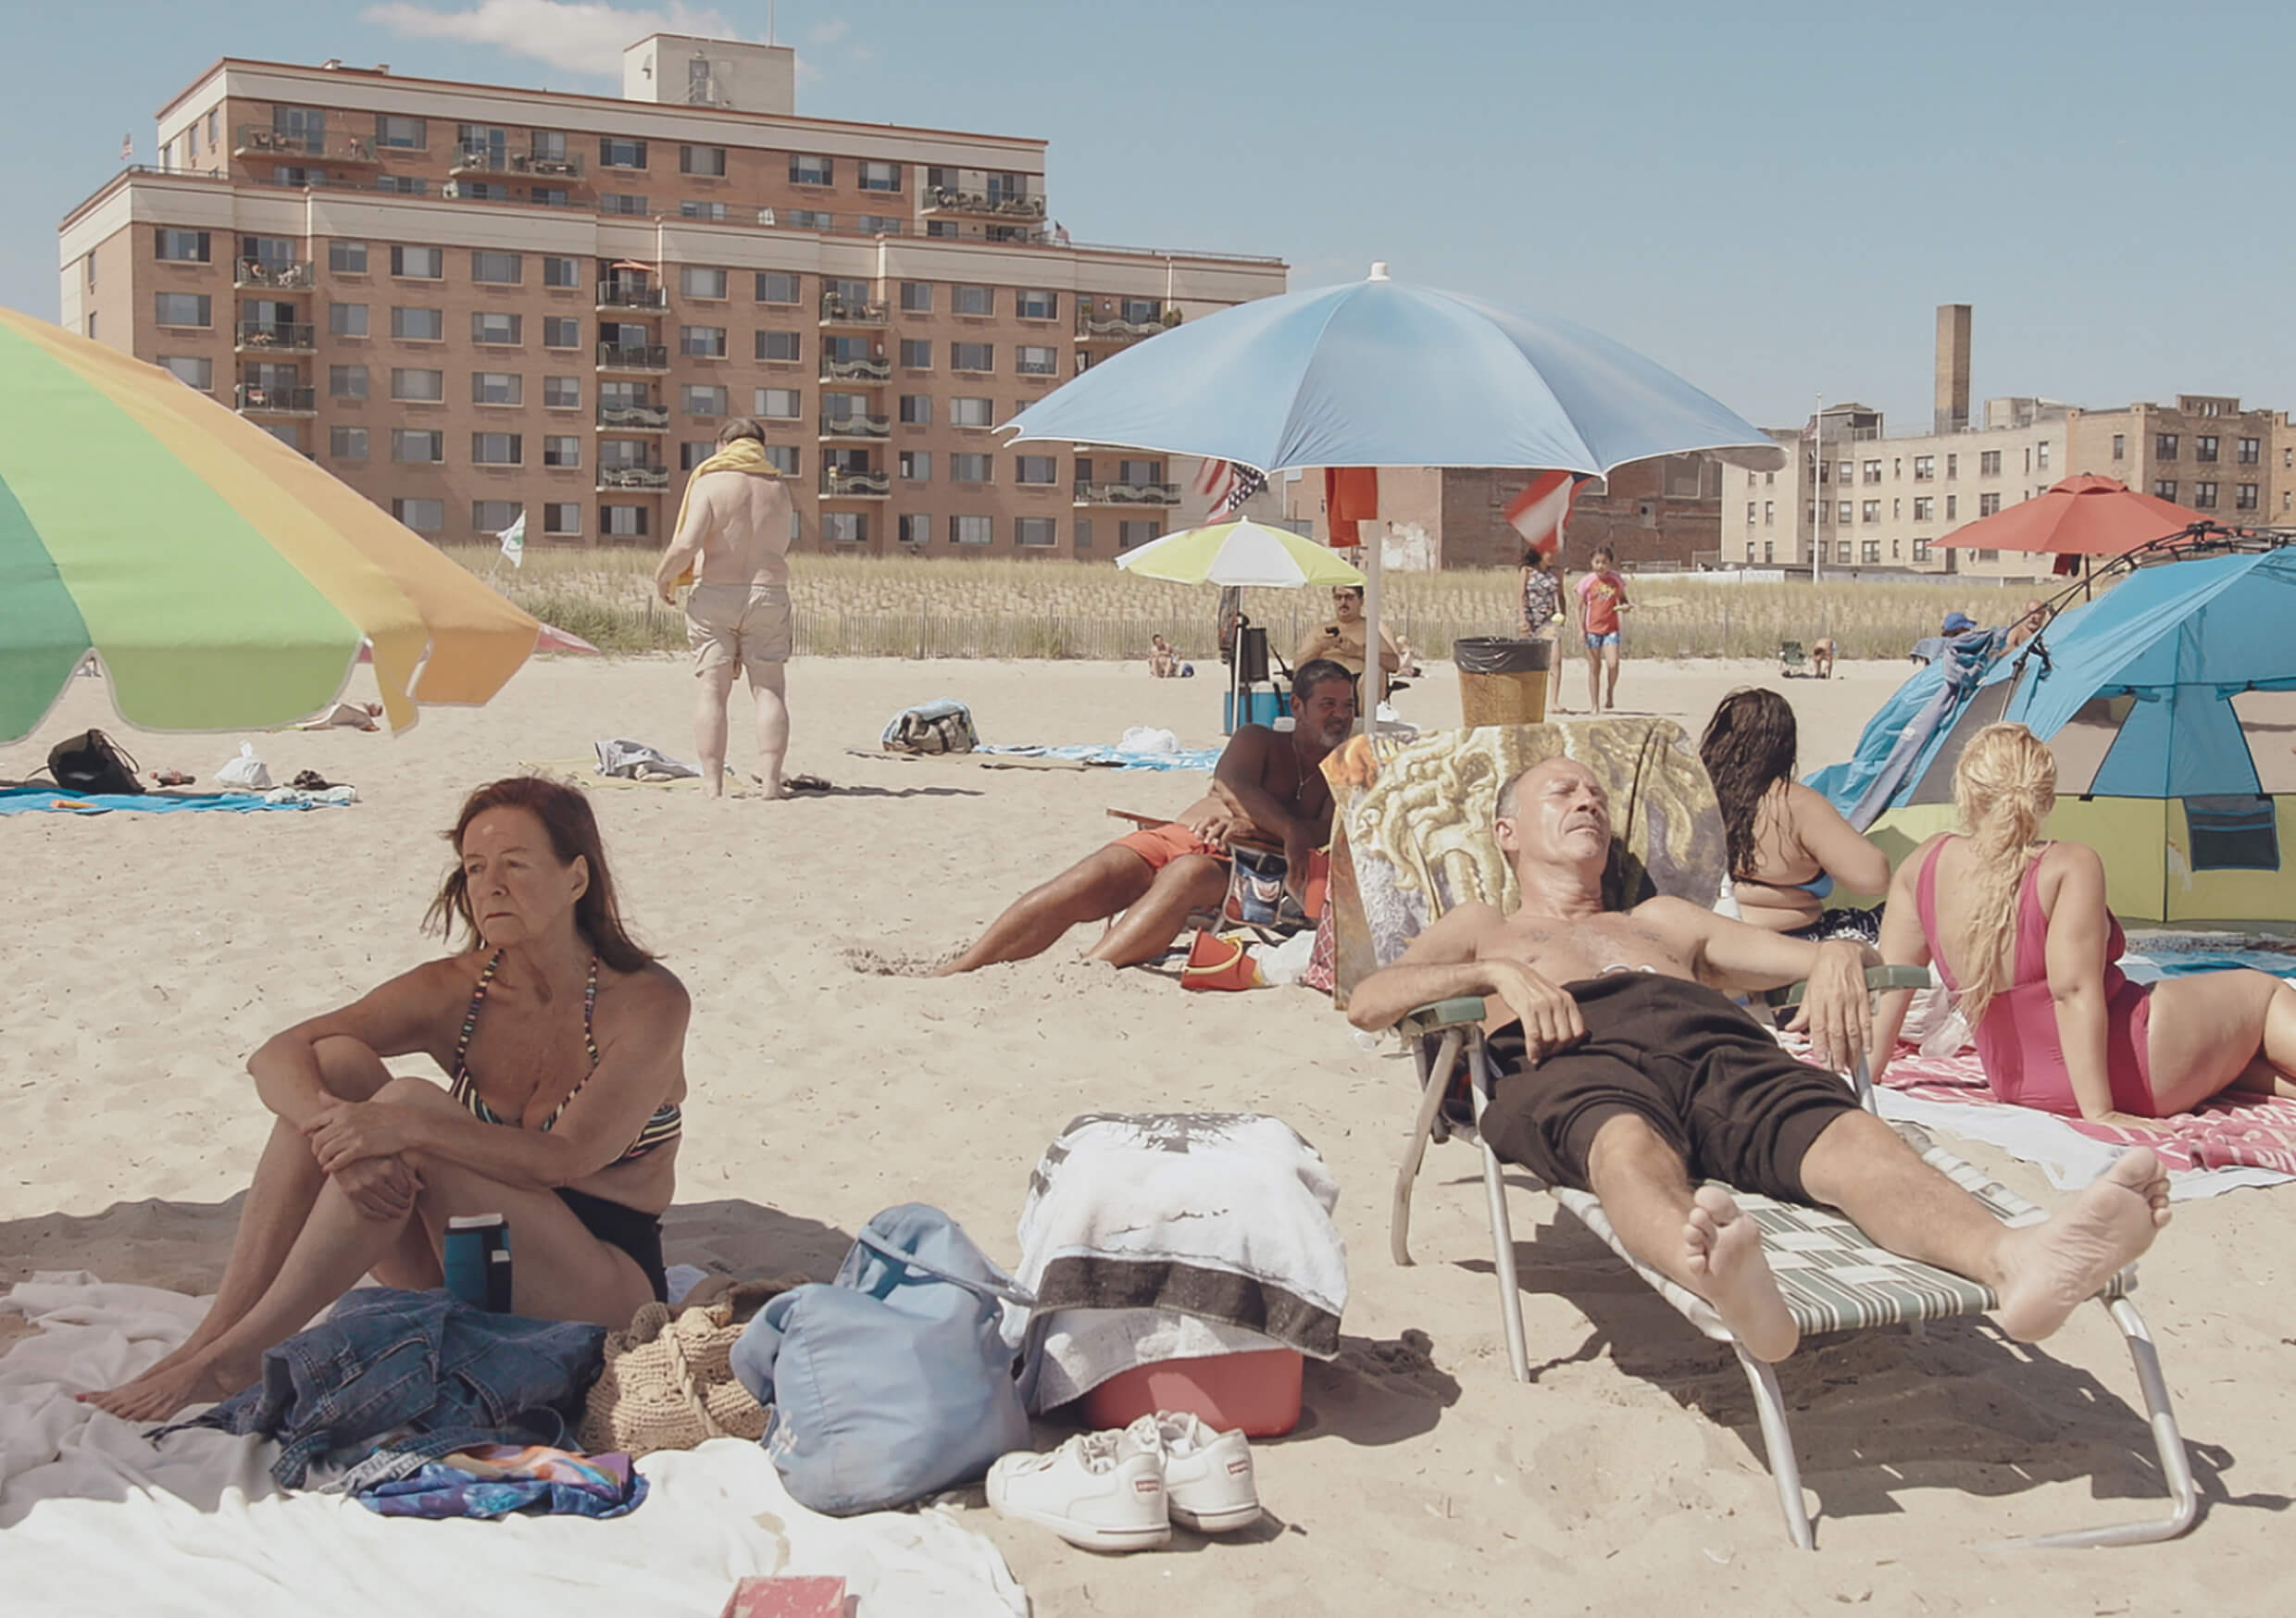 A older, white couple sit and lie down on the beach in a crowd of sunbathers and umbrellas.